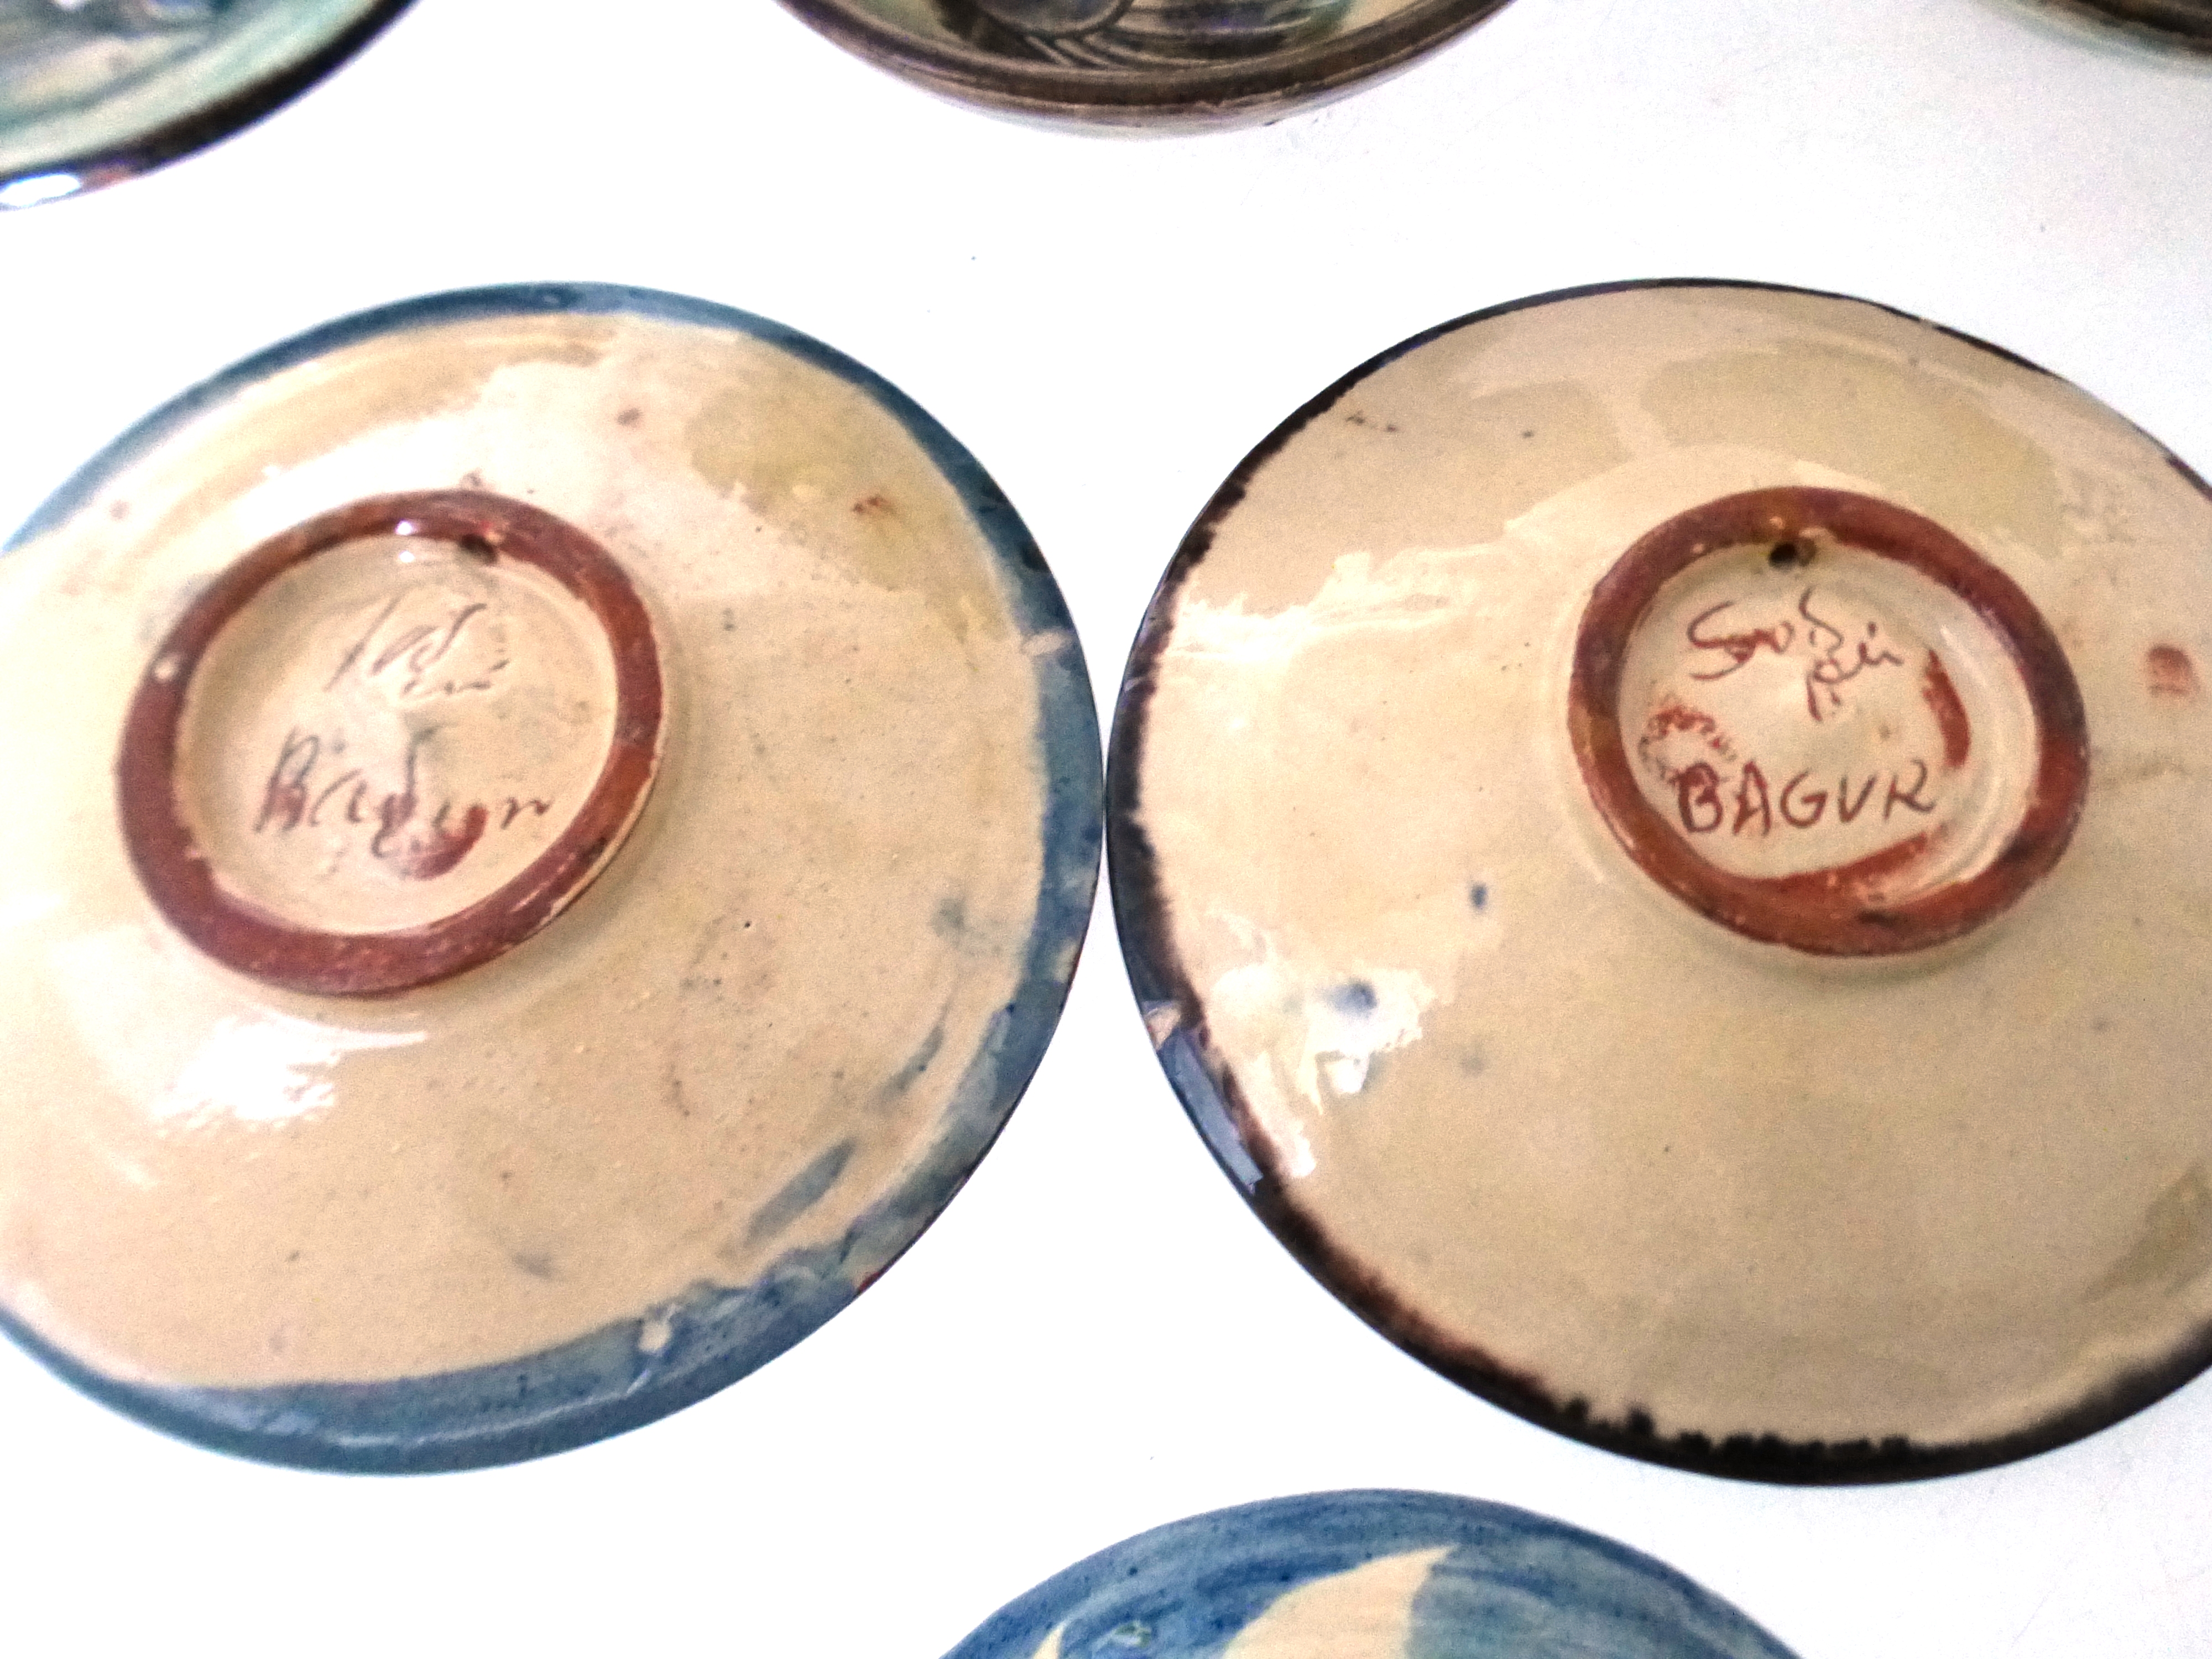 4 SIGNED ART POTTERY FISH DISHES (D: 6") AND 3 SIGNED ART POTTERY FISH PLATES (D:7") - Image 6 of 7